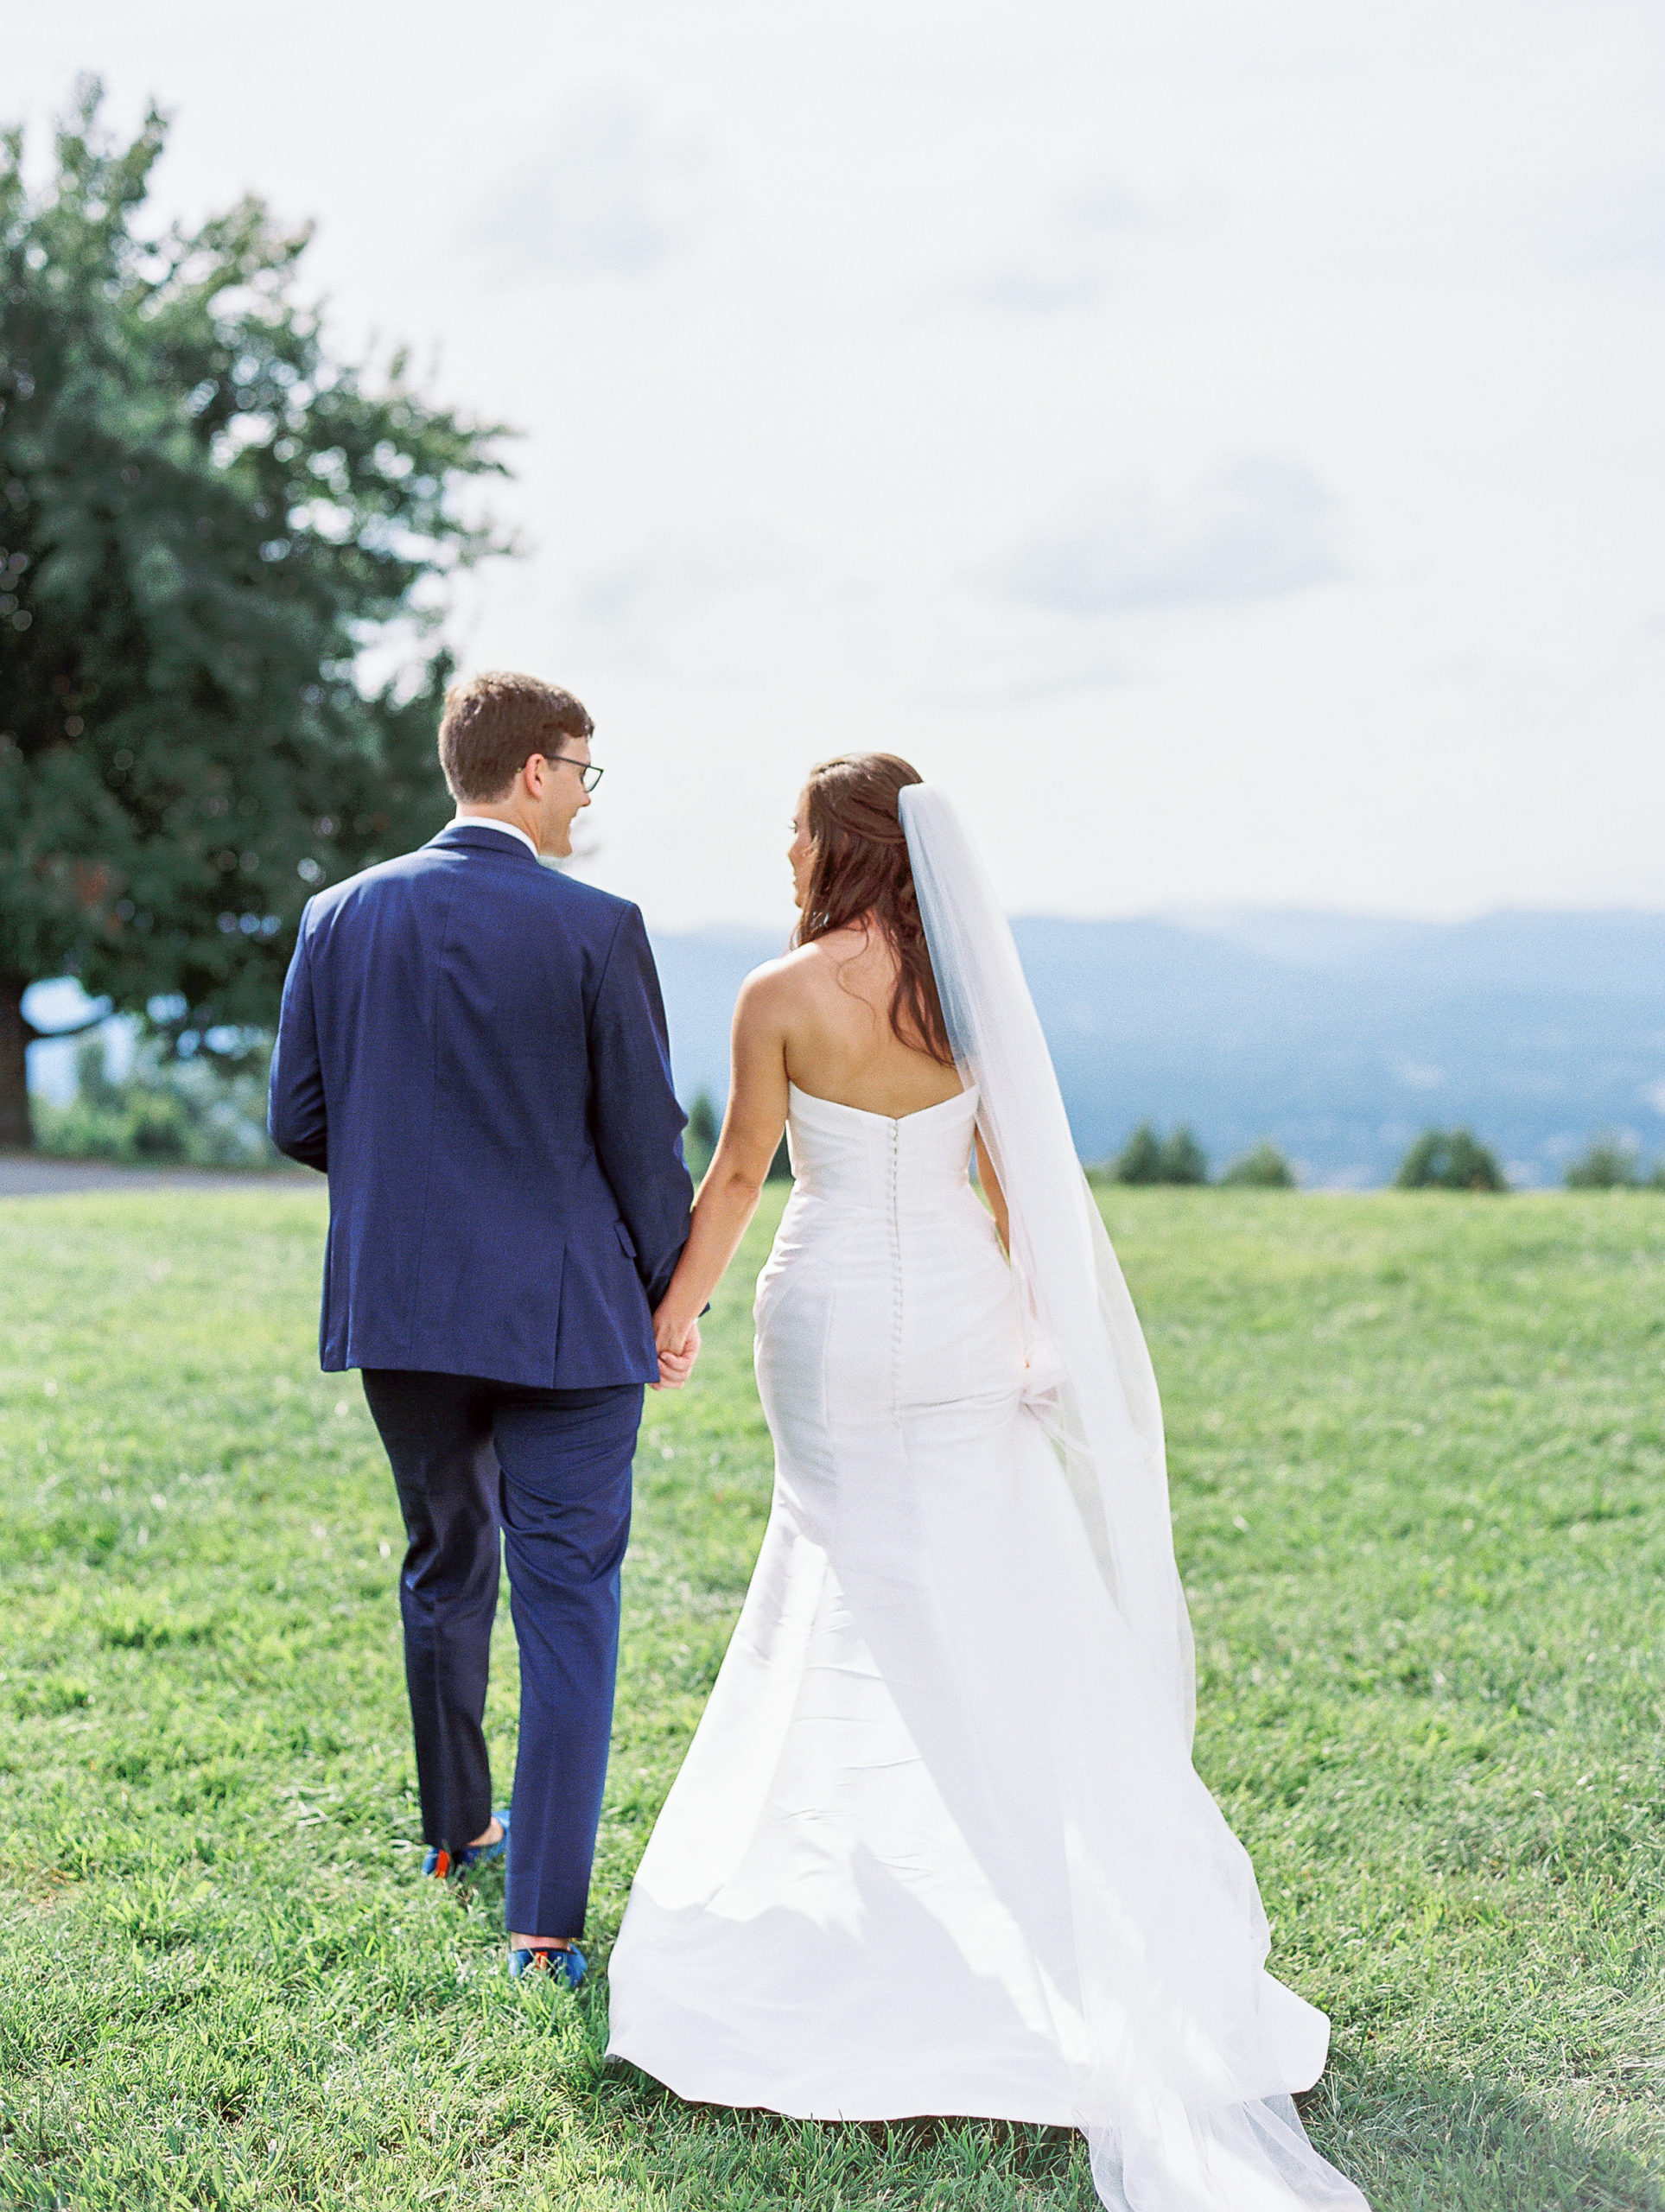 Bride and groom hold hands and walk away on mountaintop landscape for Charlottesville Wedding Photography
